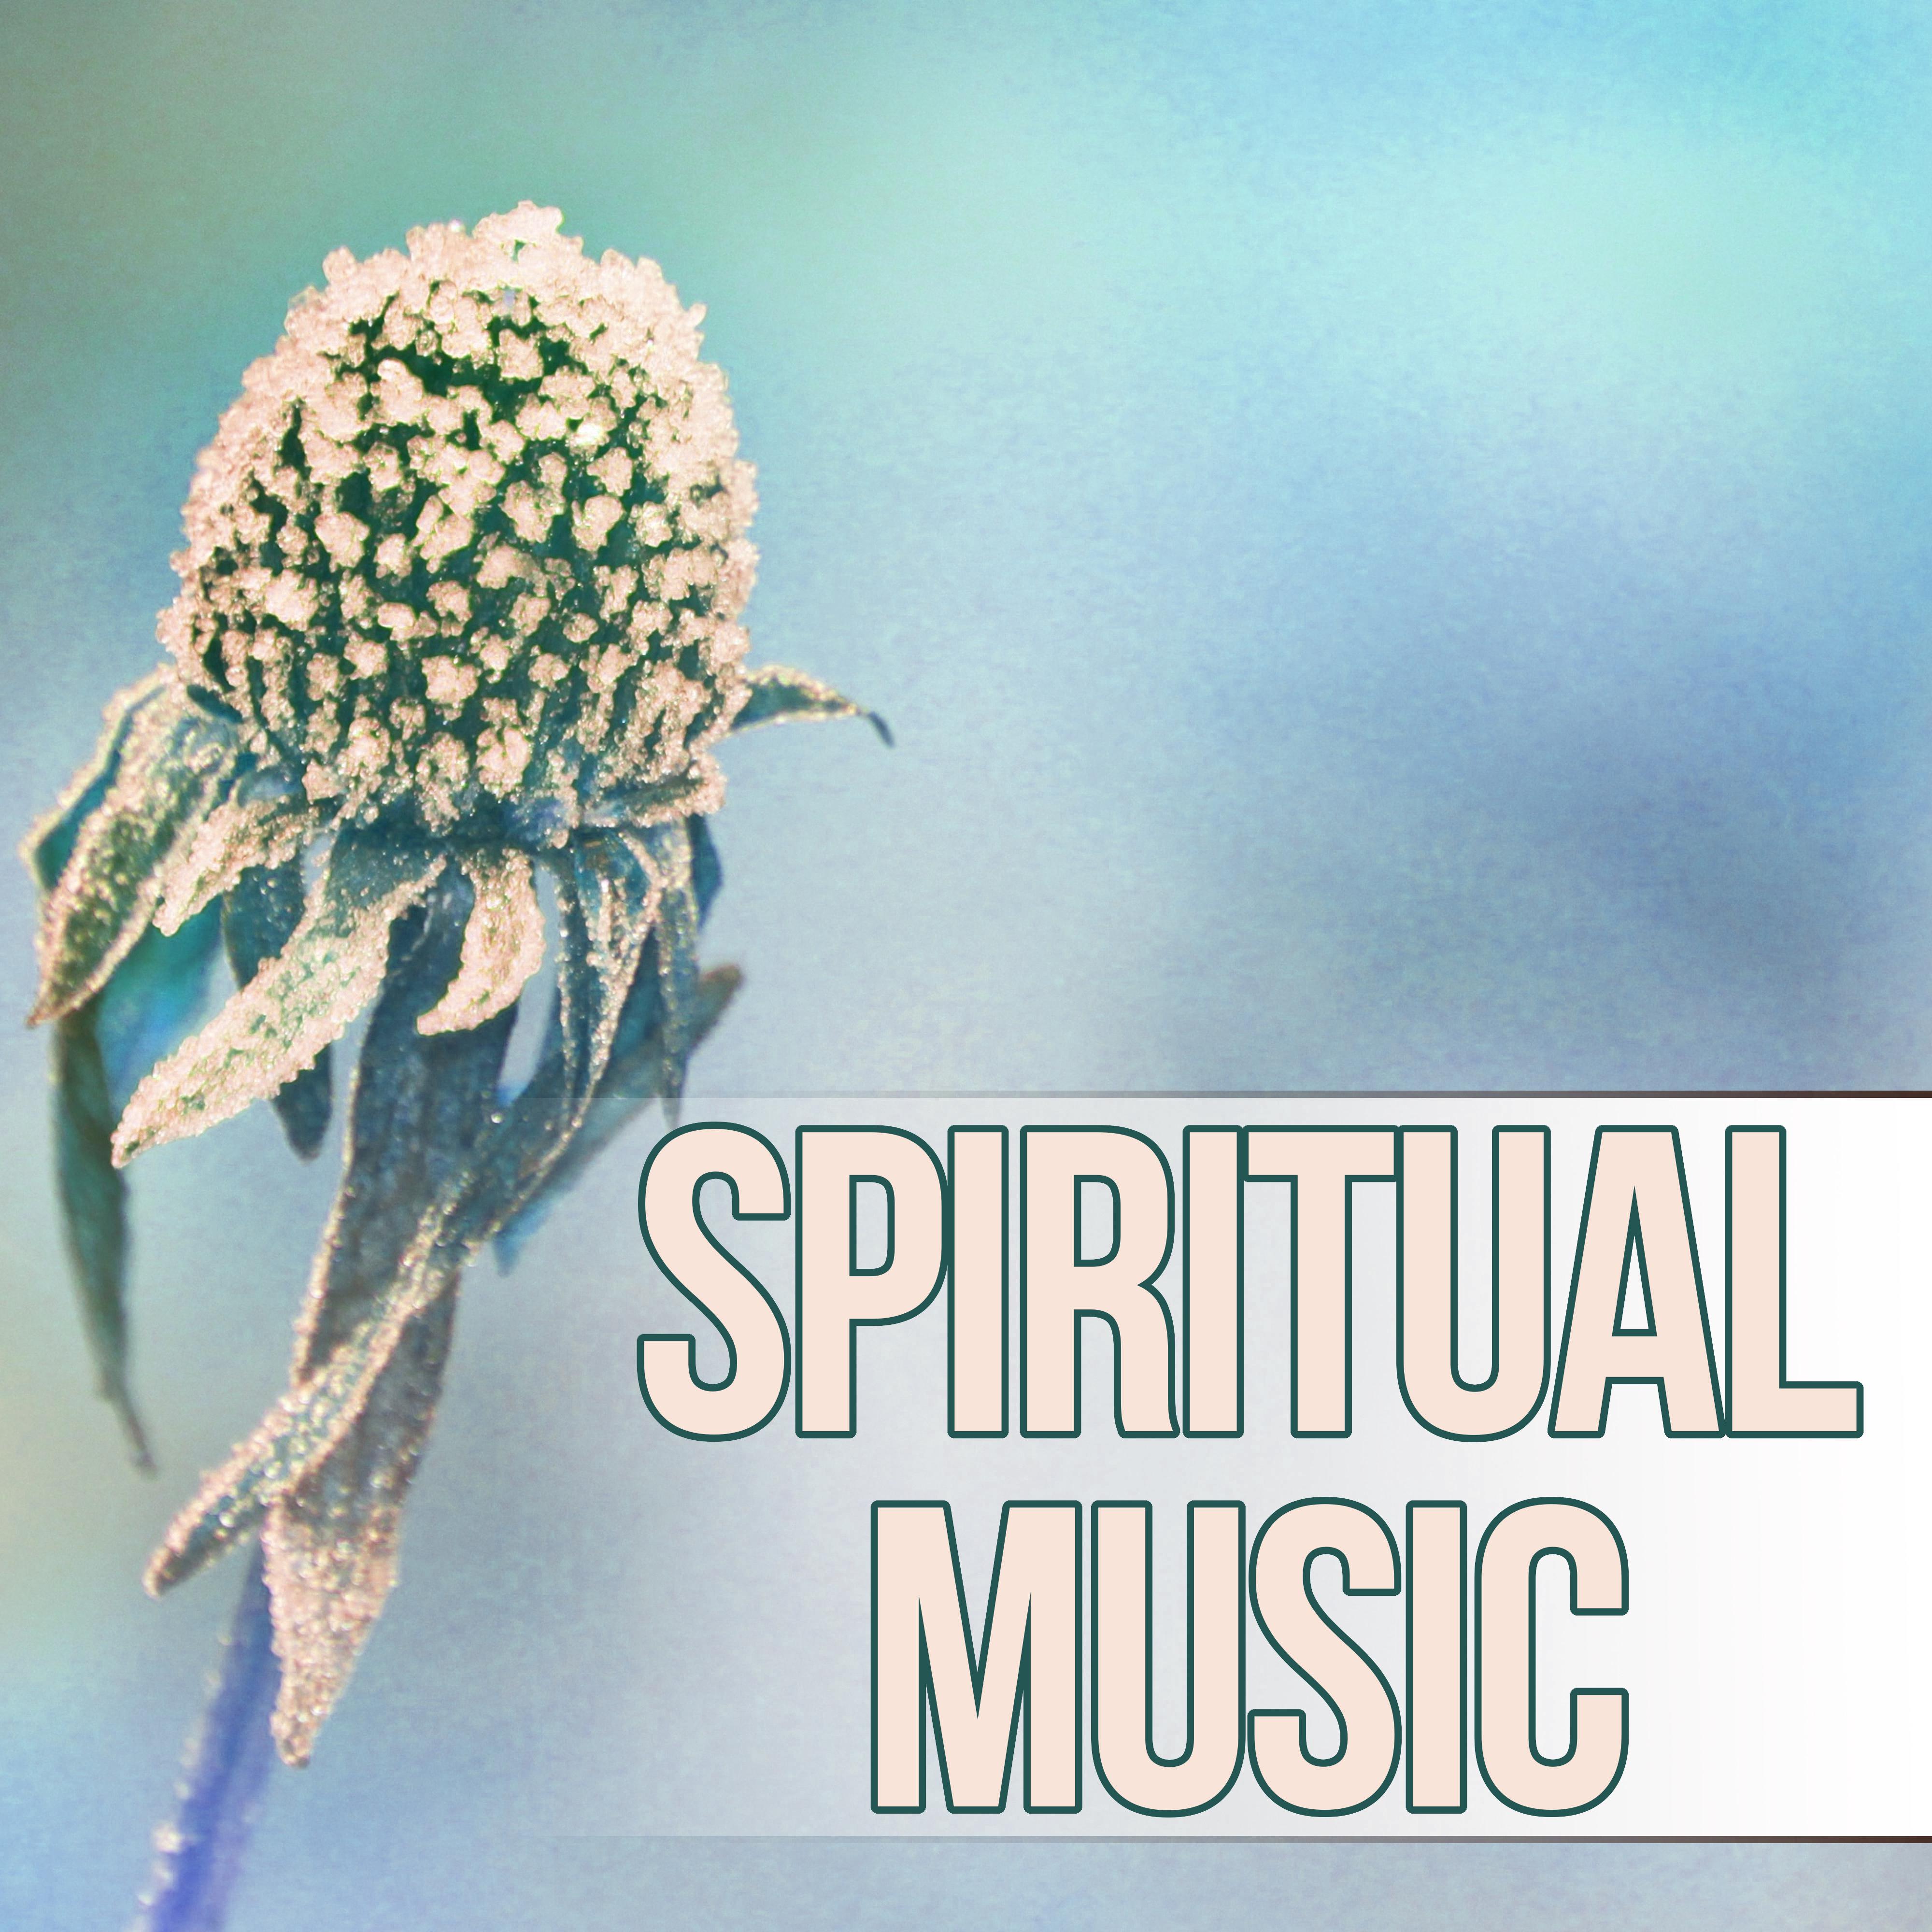 Spiritual Music - Golden Memories and Relaxation Music with Nature Sounds, Sound Therapy for Stress Relief